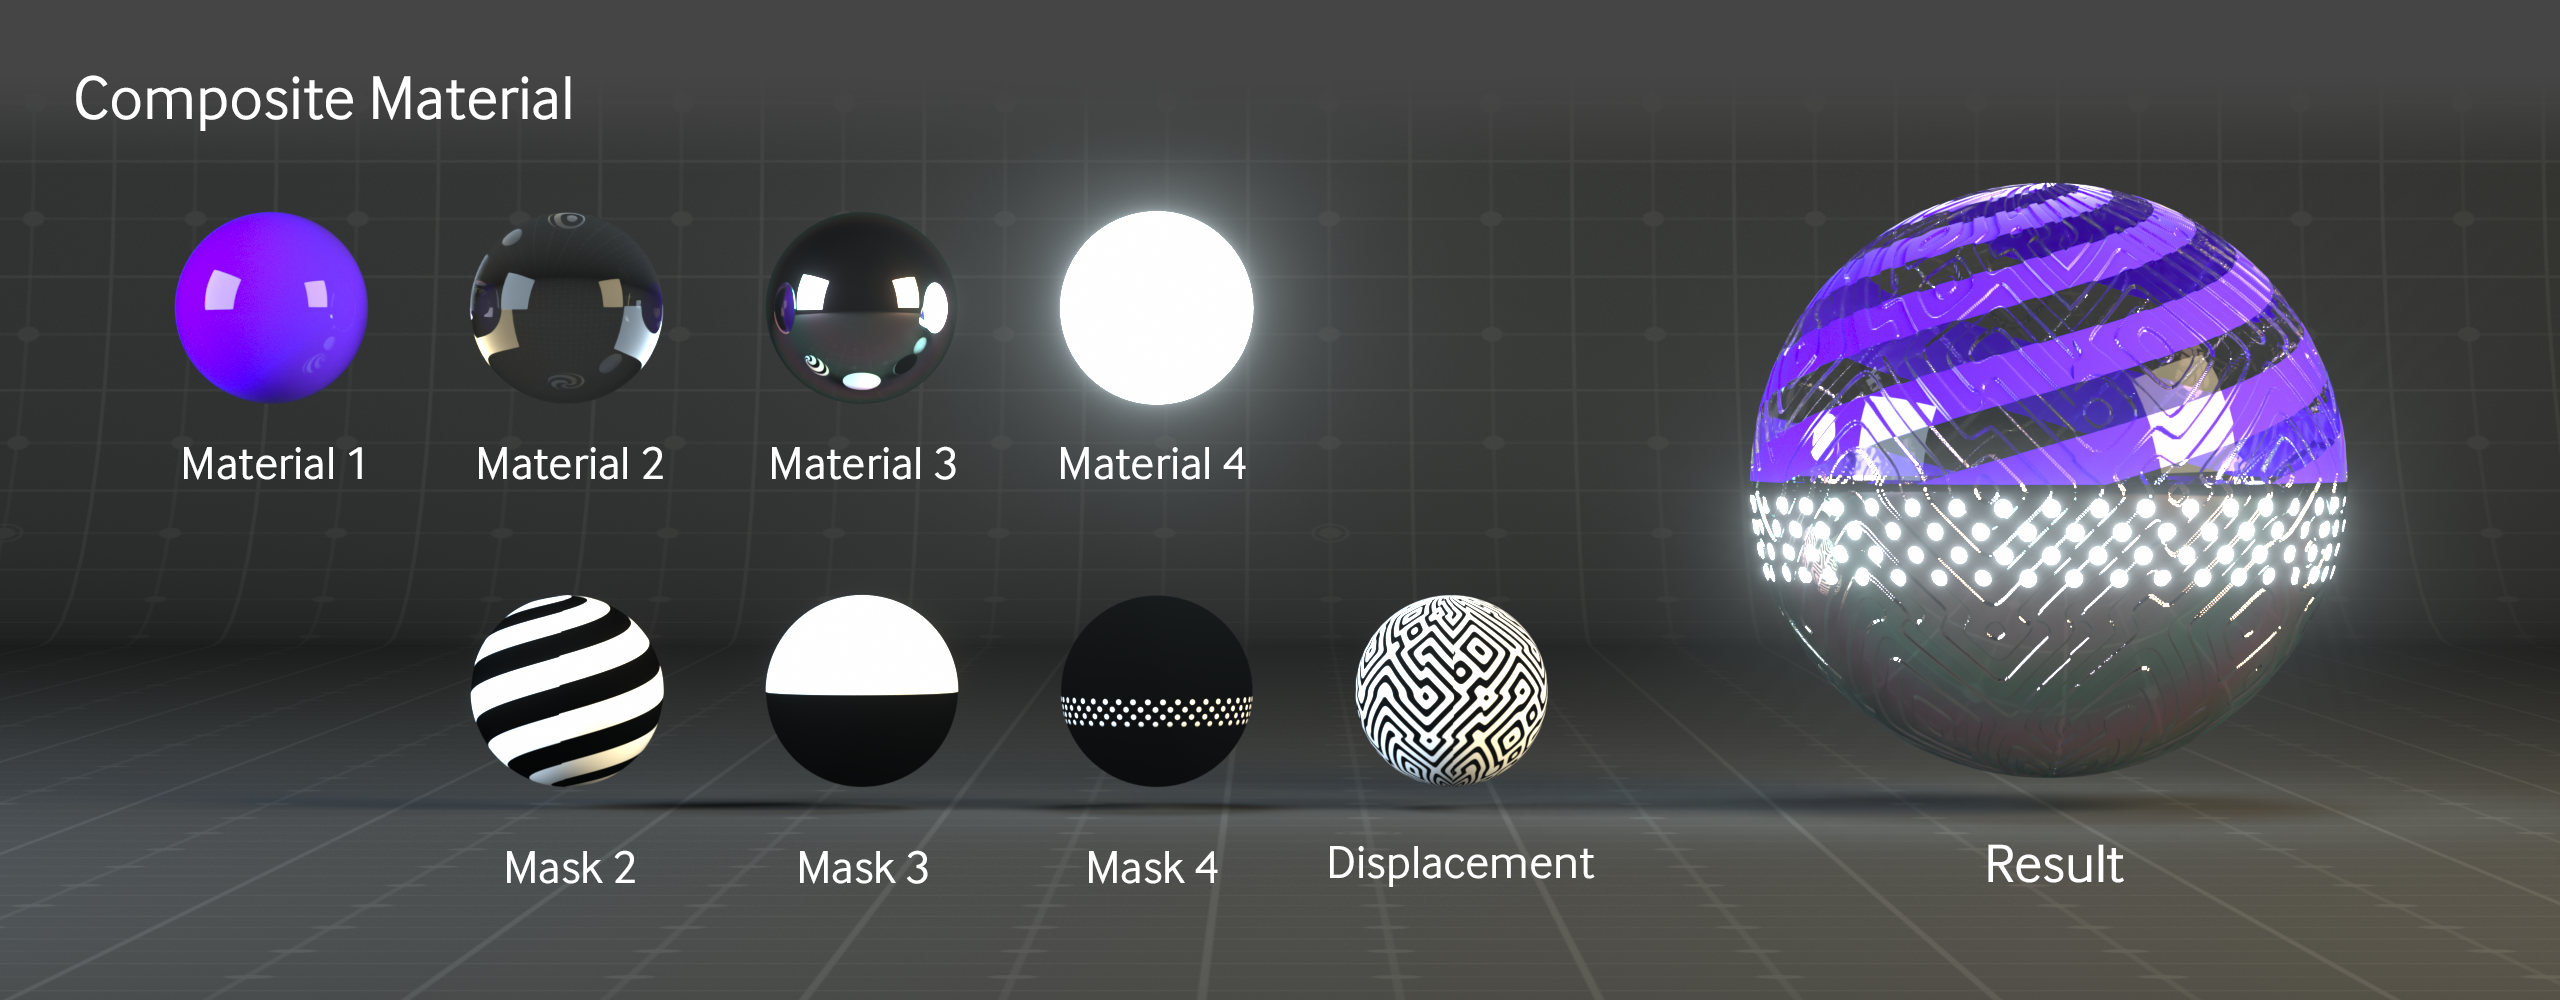 15_Composite_Material.png